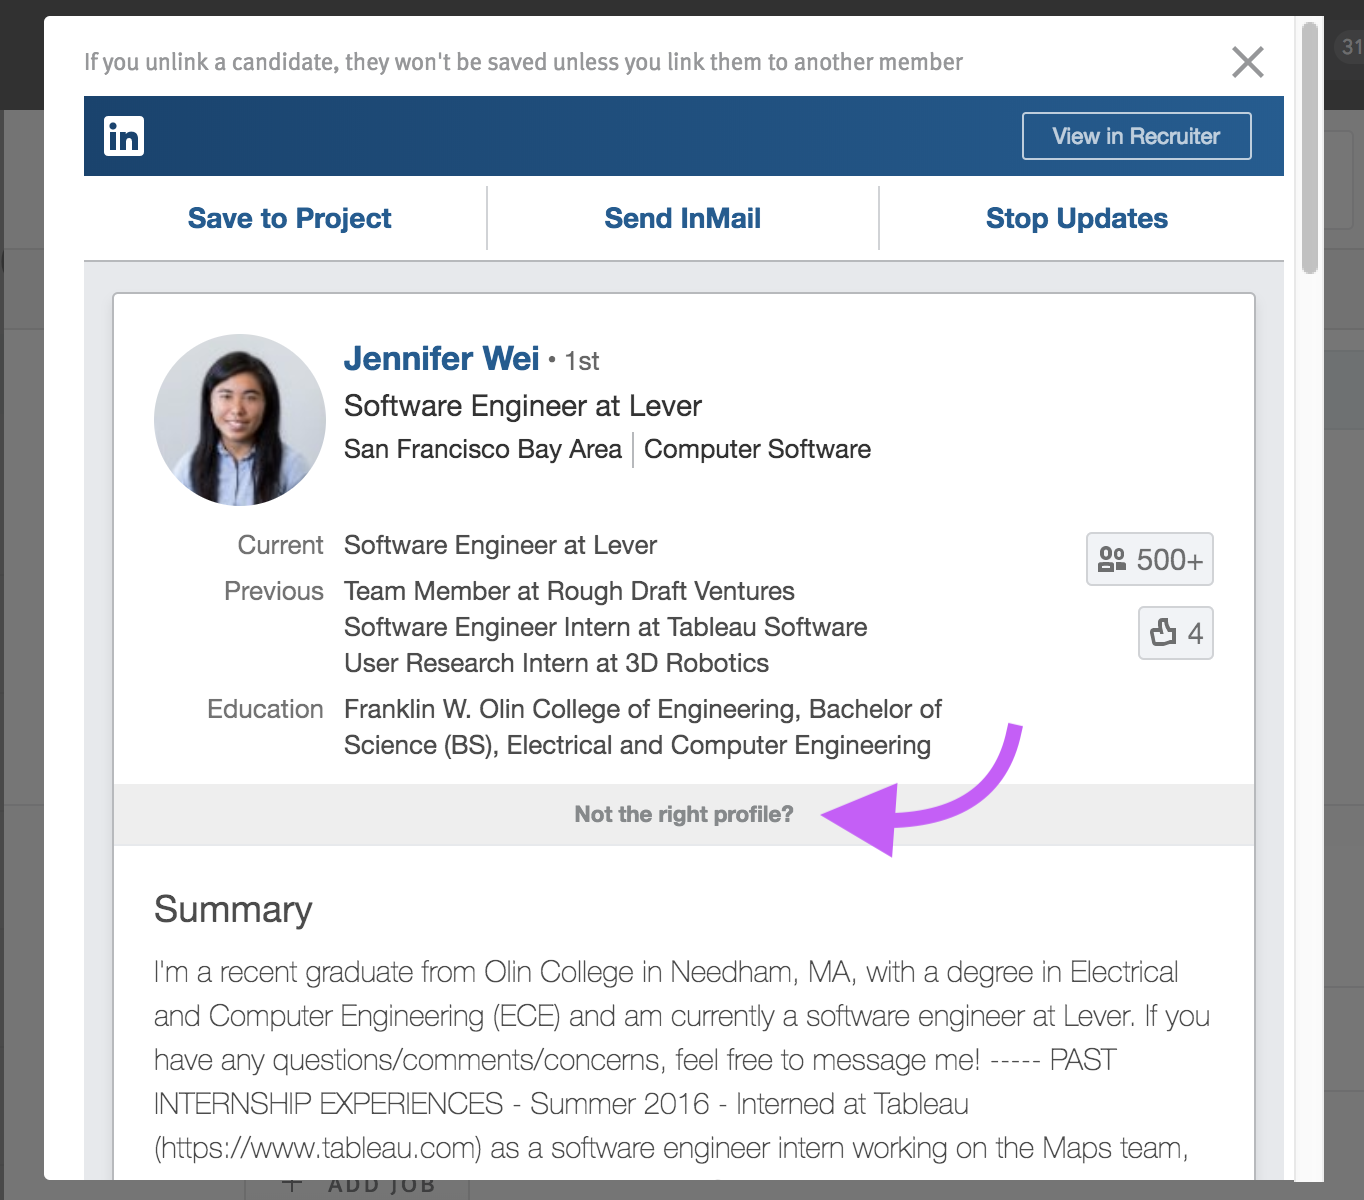 Matching candidate profile in LinkedIn subwindow, with arrow pointing to Not the right profile? link